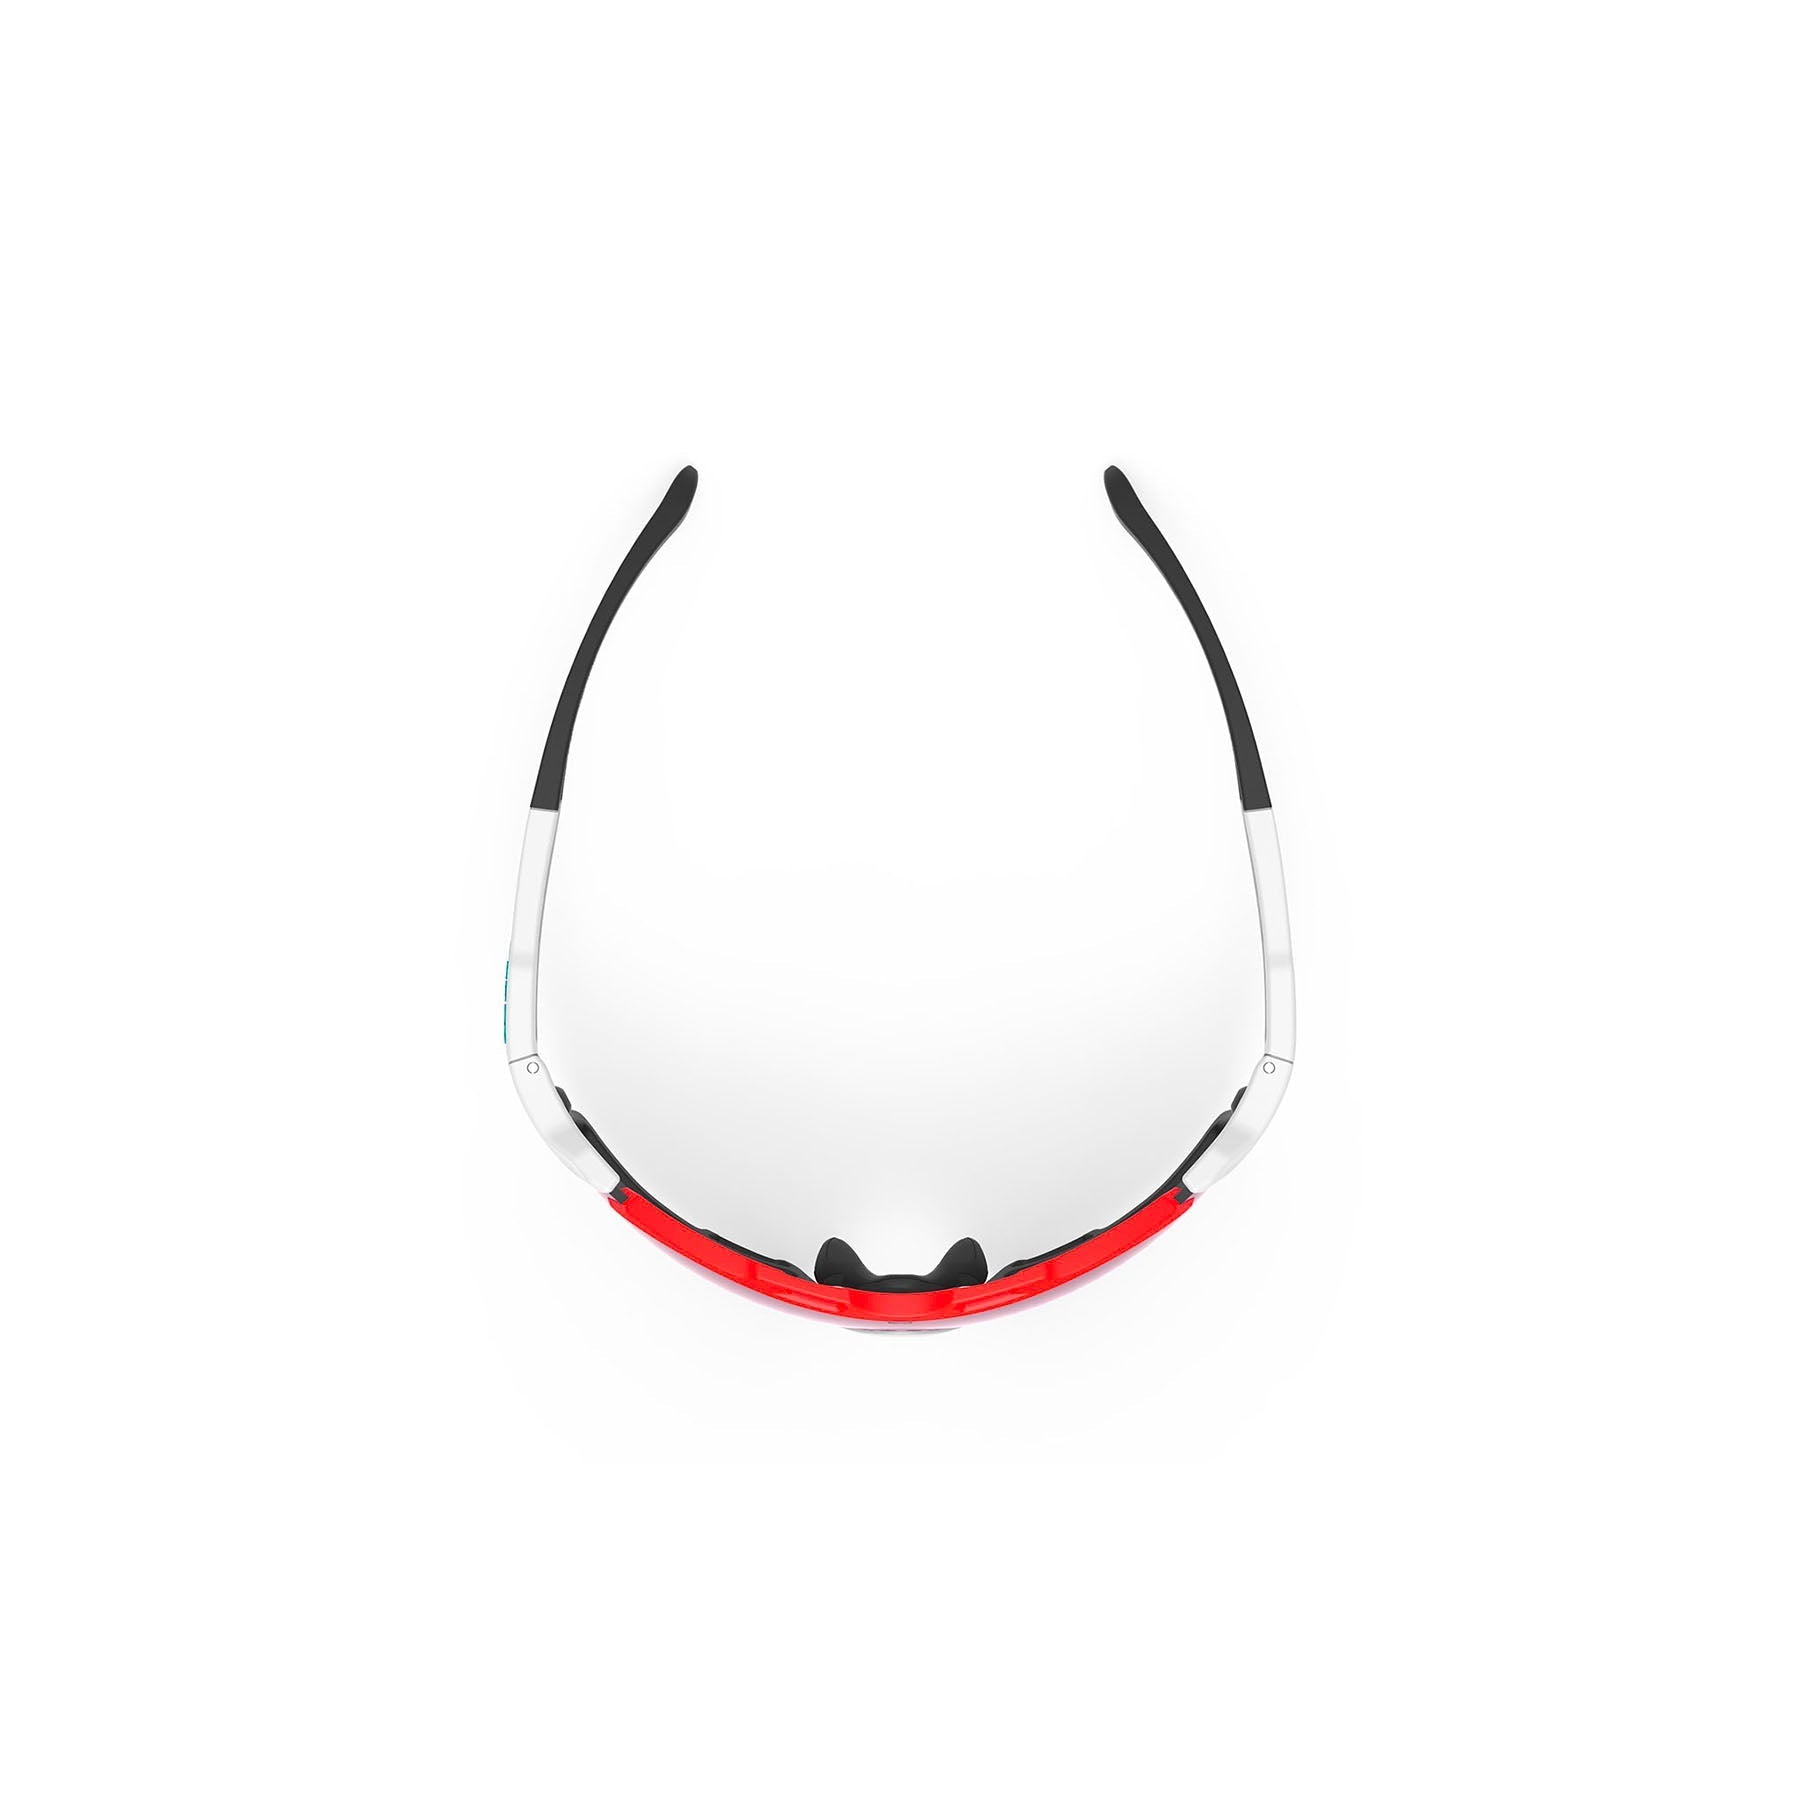 Rudy Project Cutline running and cycling sport and sport prescription sunglasses#color_cutline-white-matte-with-multilaser-red-lenses-red-and-black-bumpers